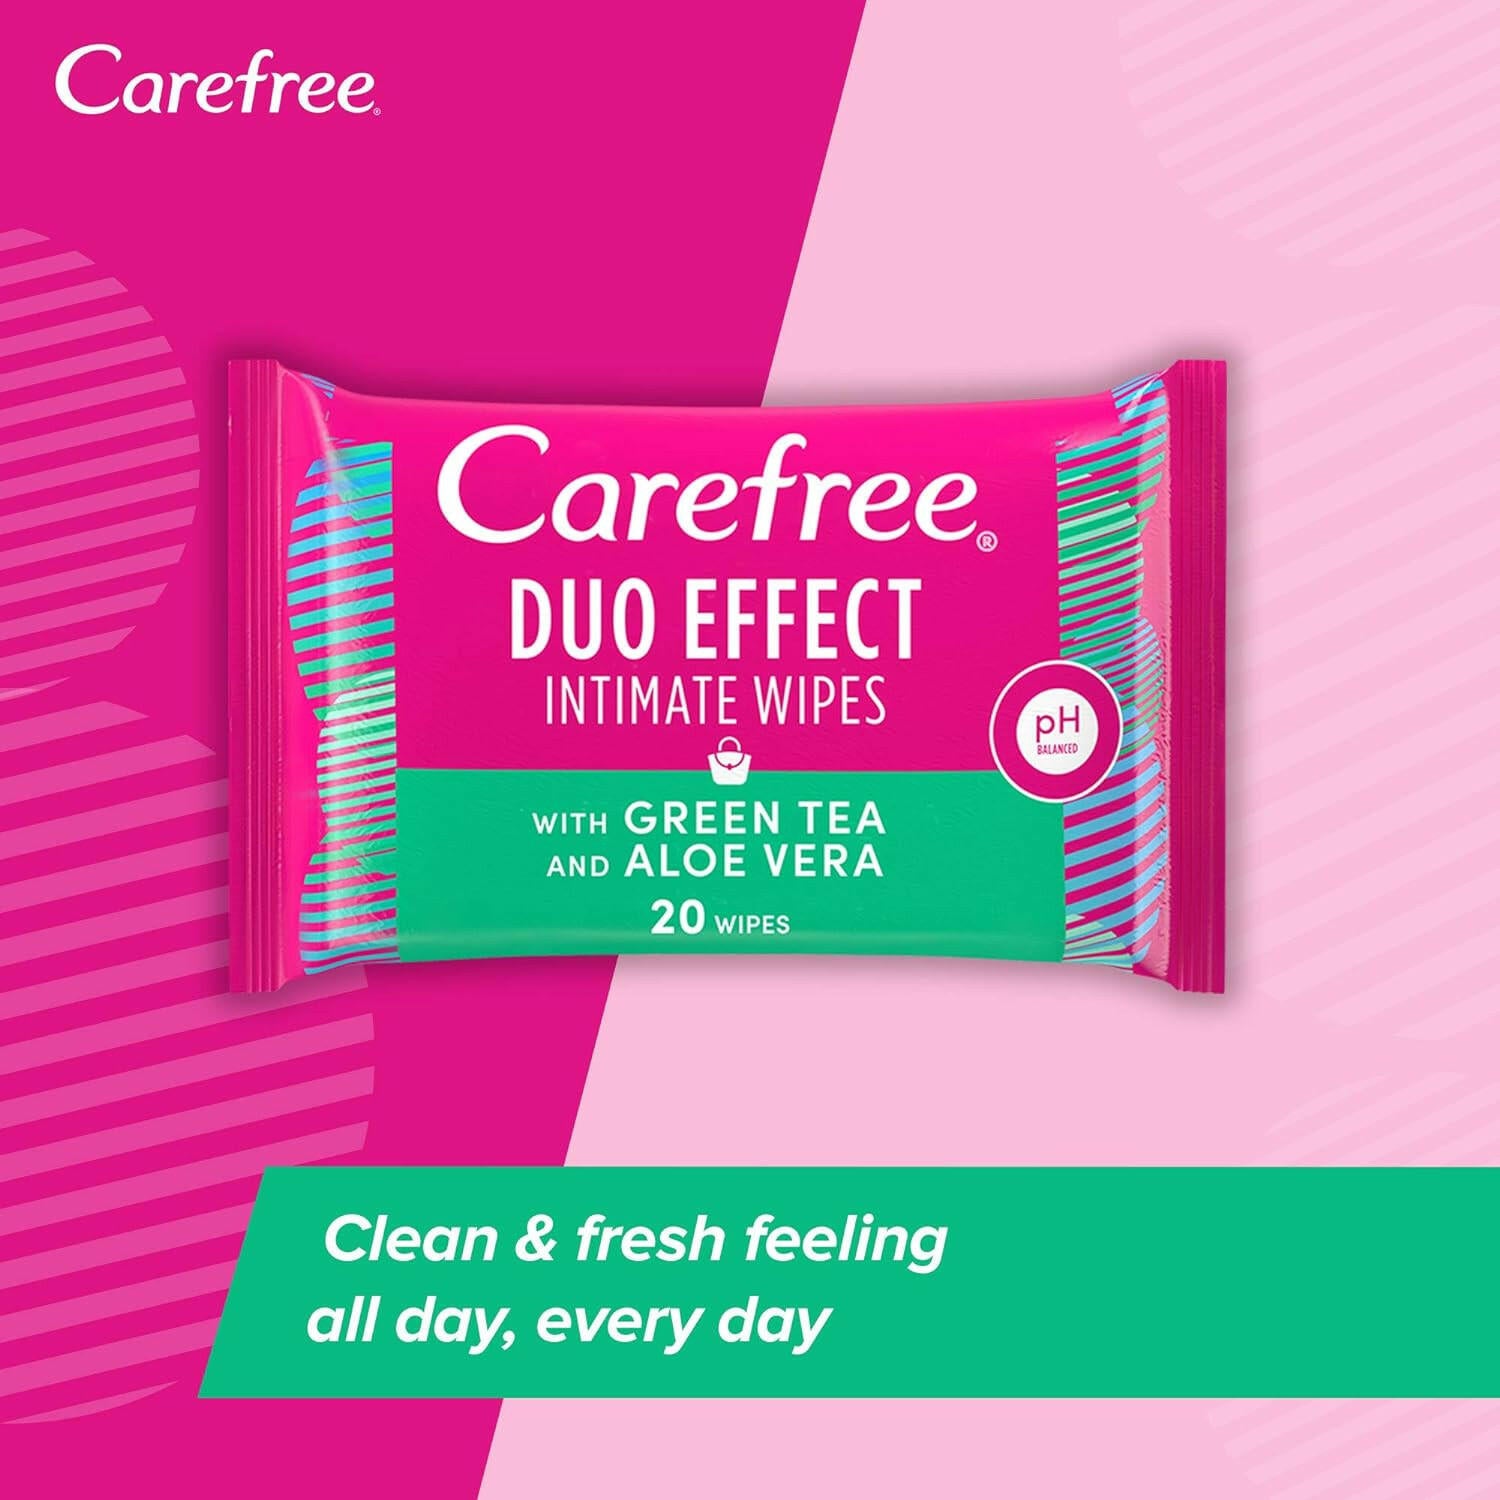 Carefree Daily Intimate Wipes Duo Effect With Green Tea And Aloe Vera, 20pcs